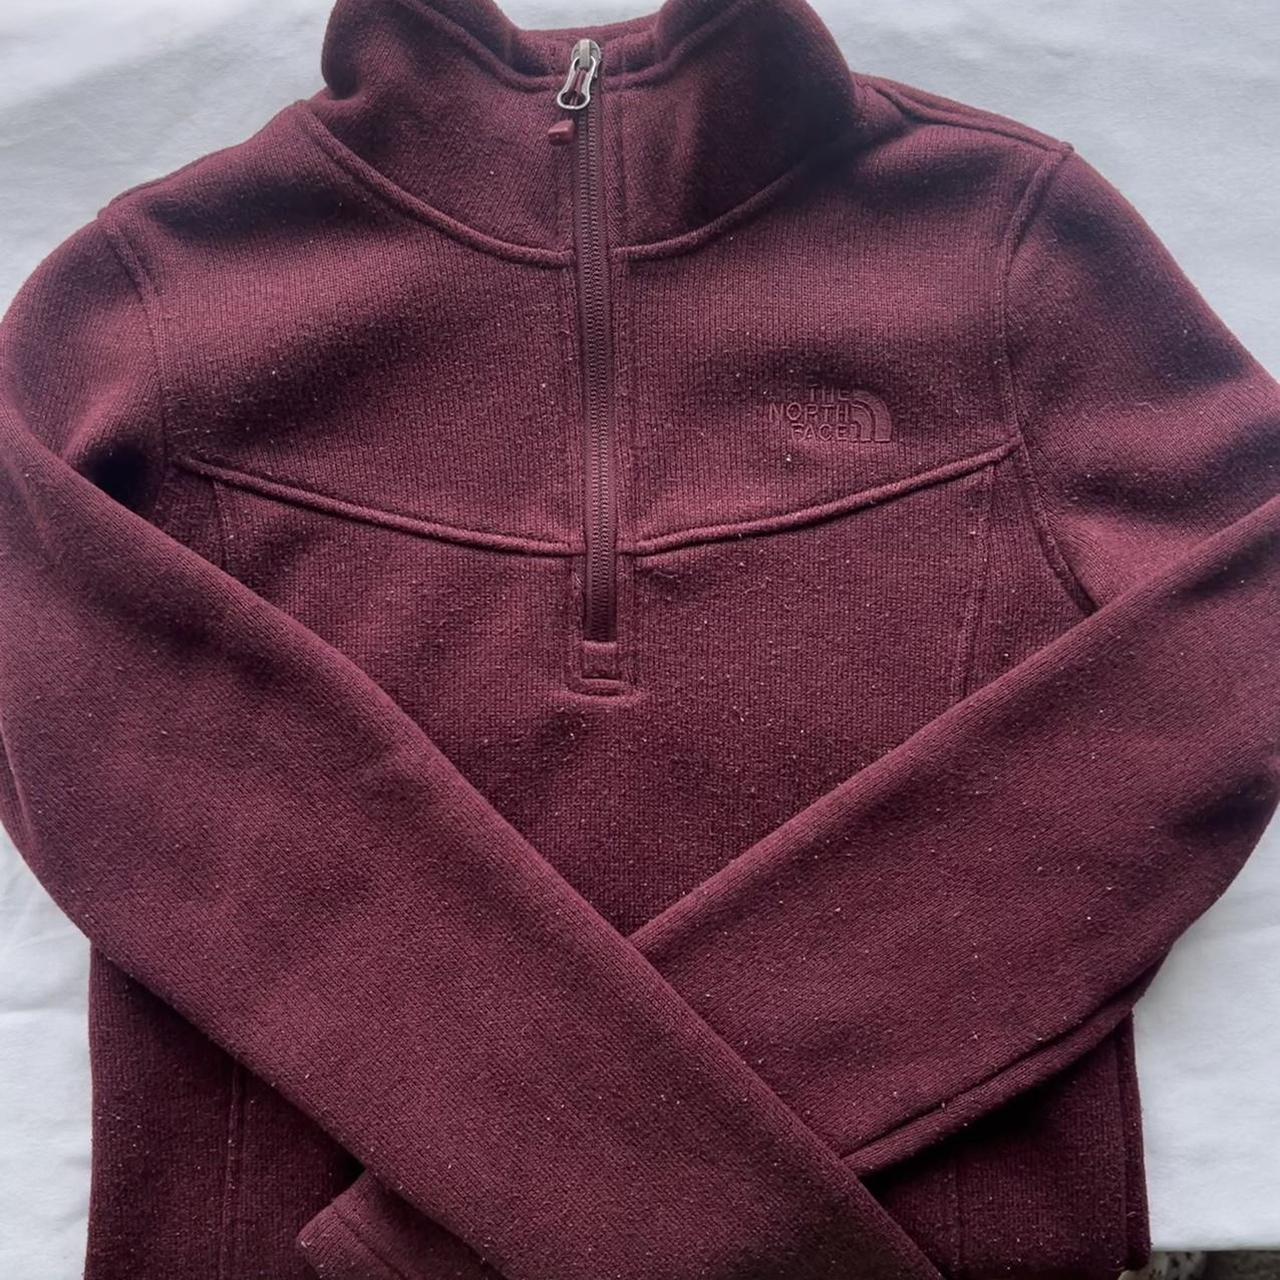 The North Face Women's Jumper